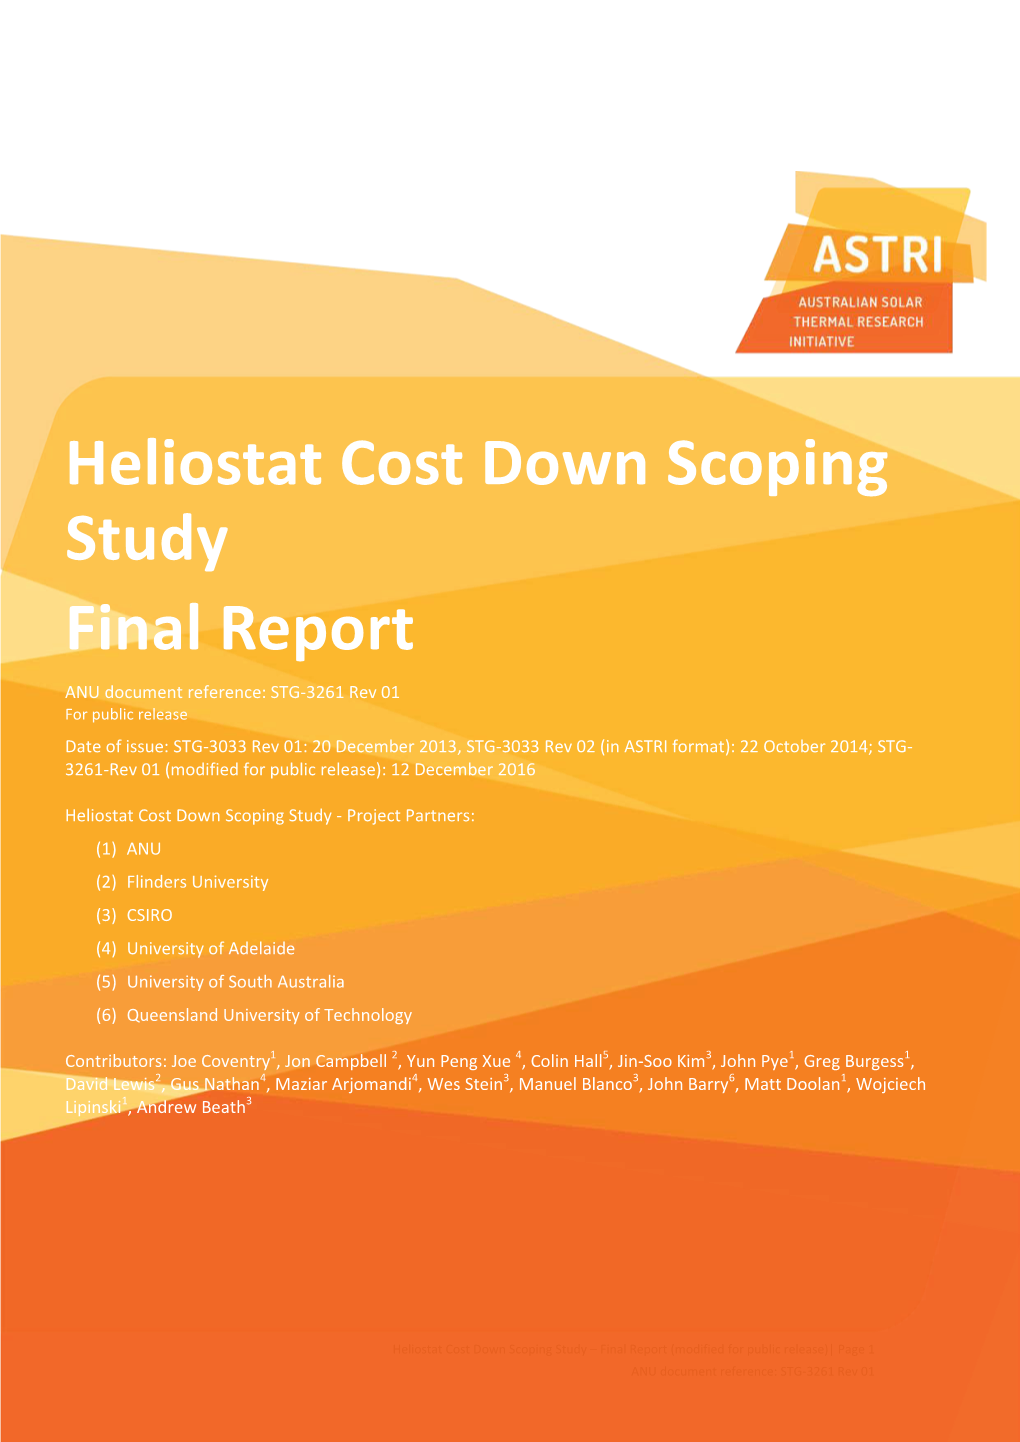 ASTRI Heliostat Cost Down Scoping Study